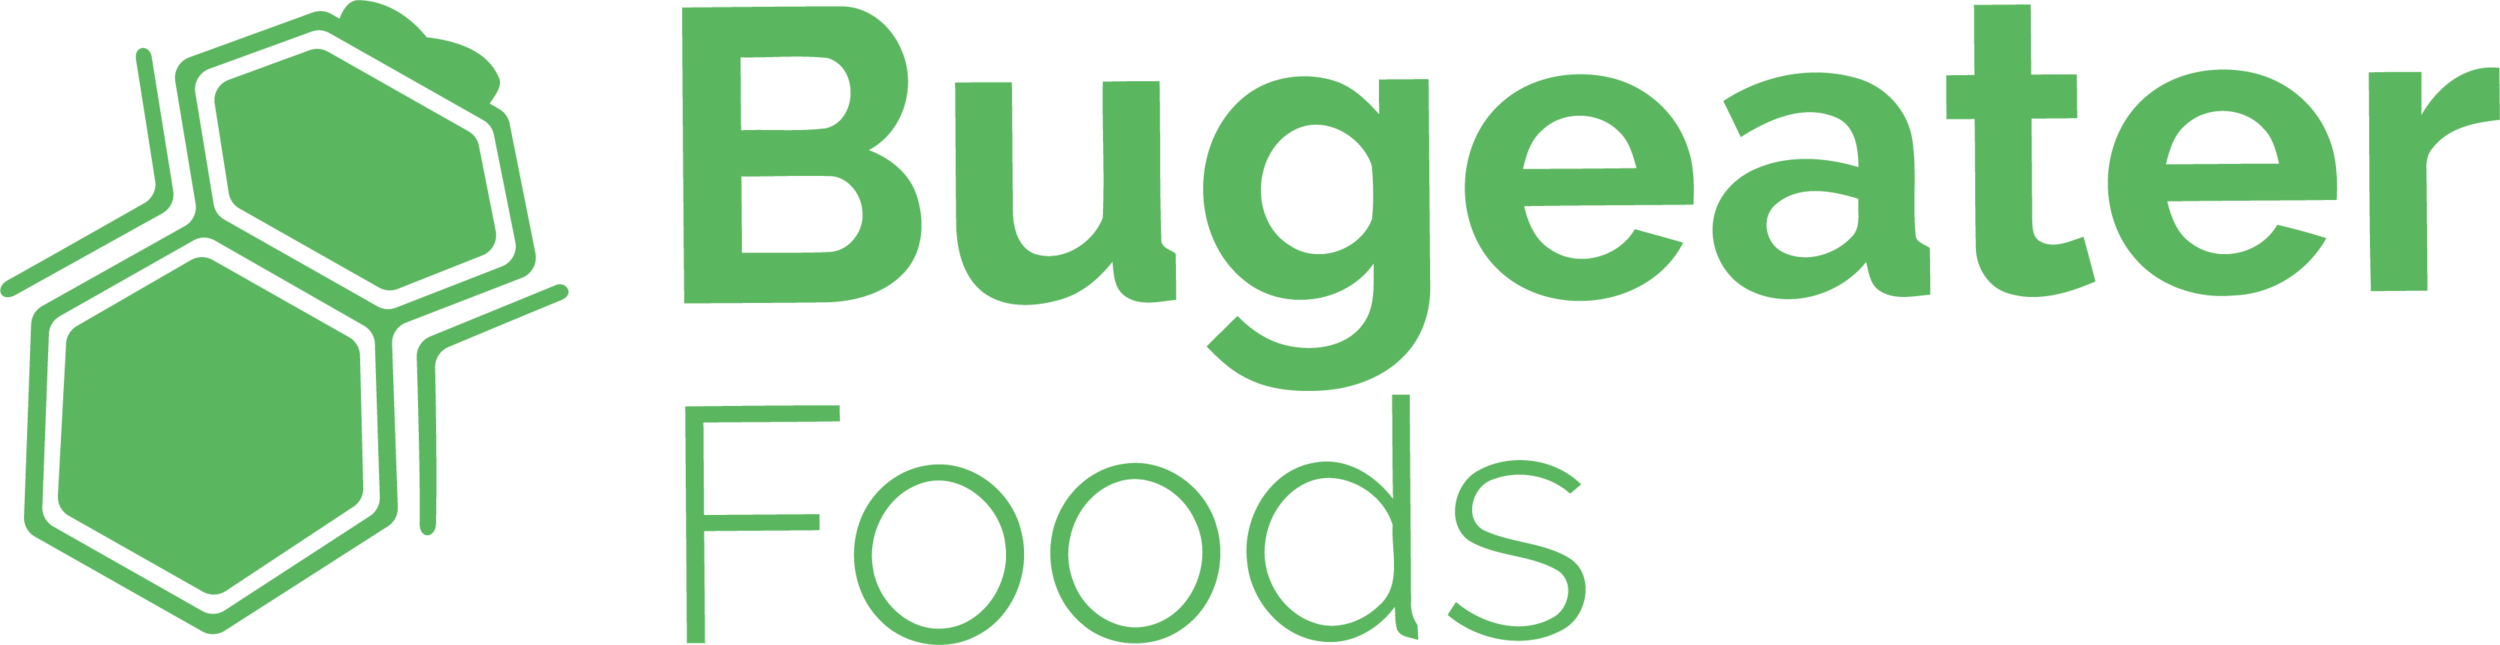 Bugeater Foods.png